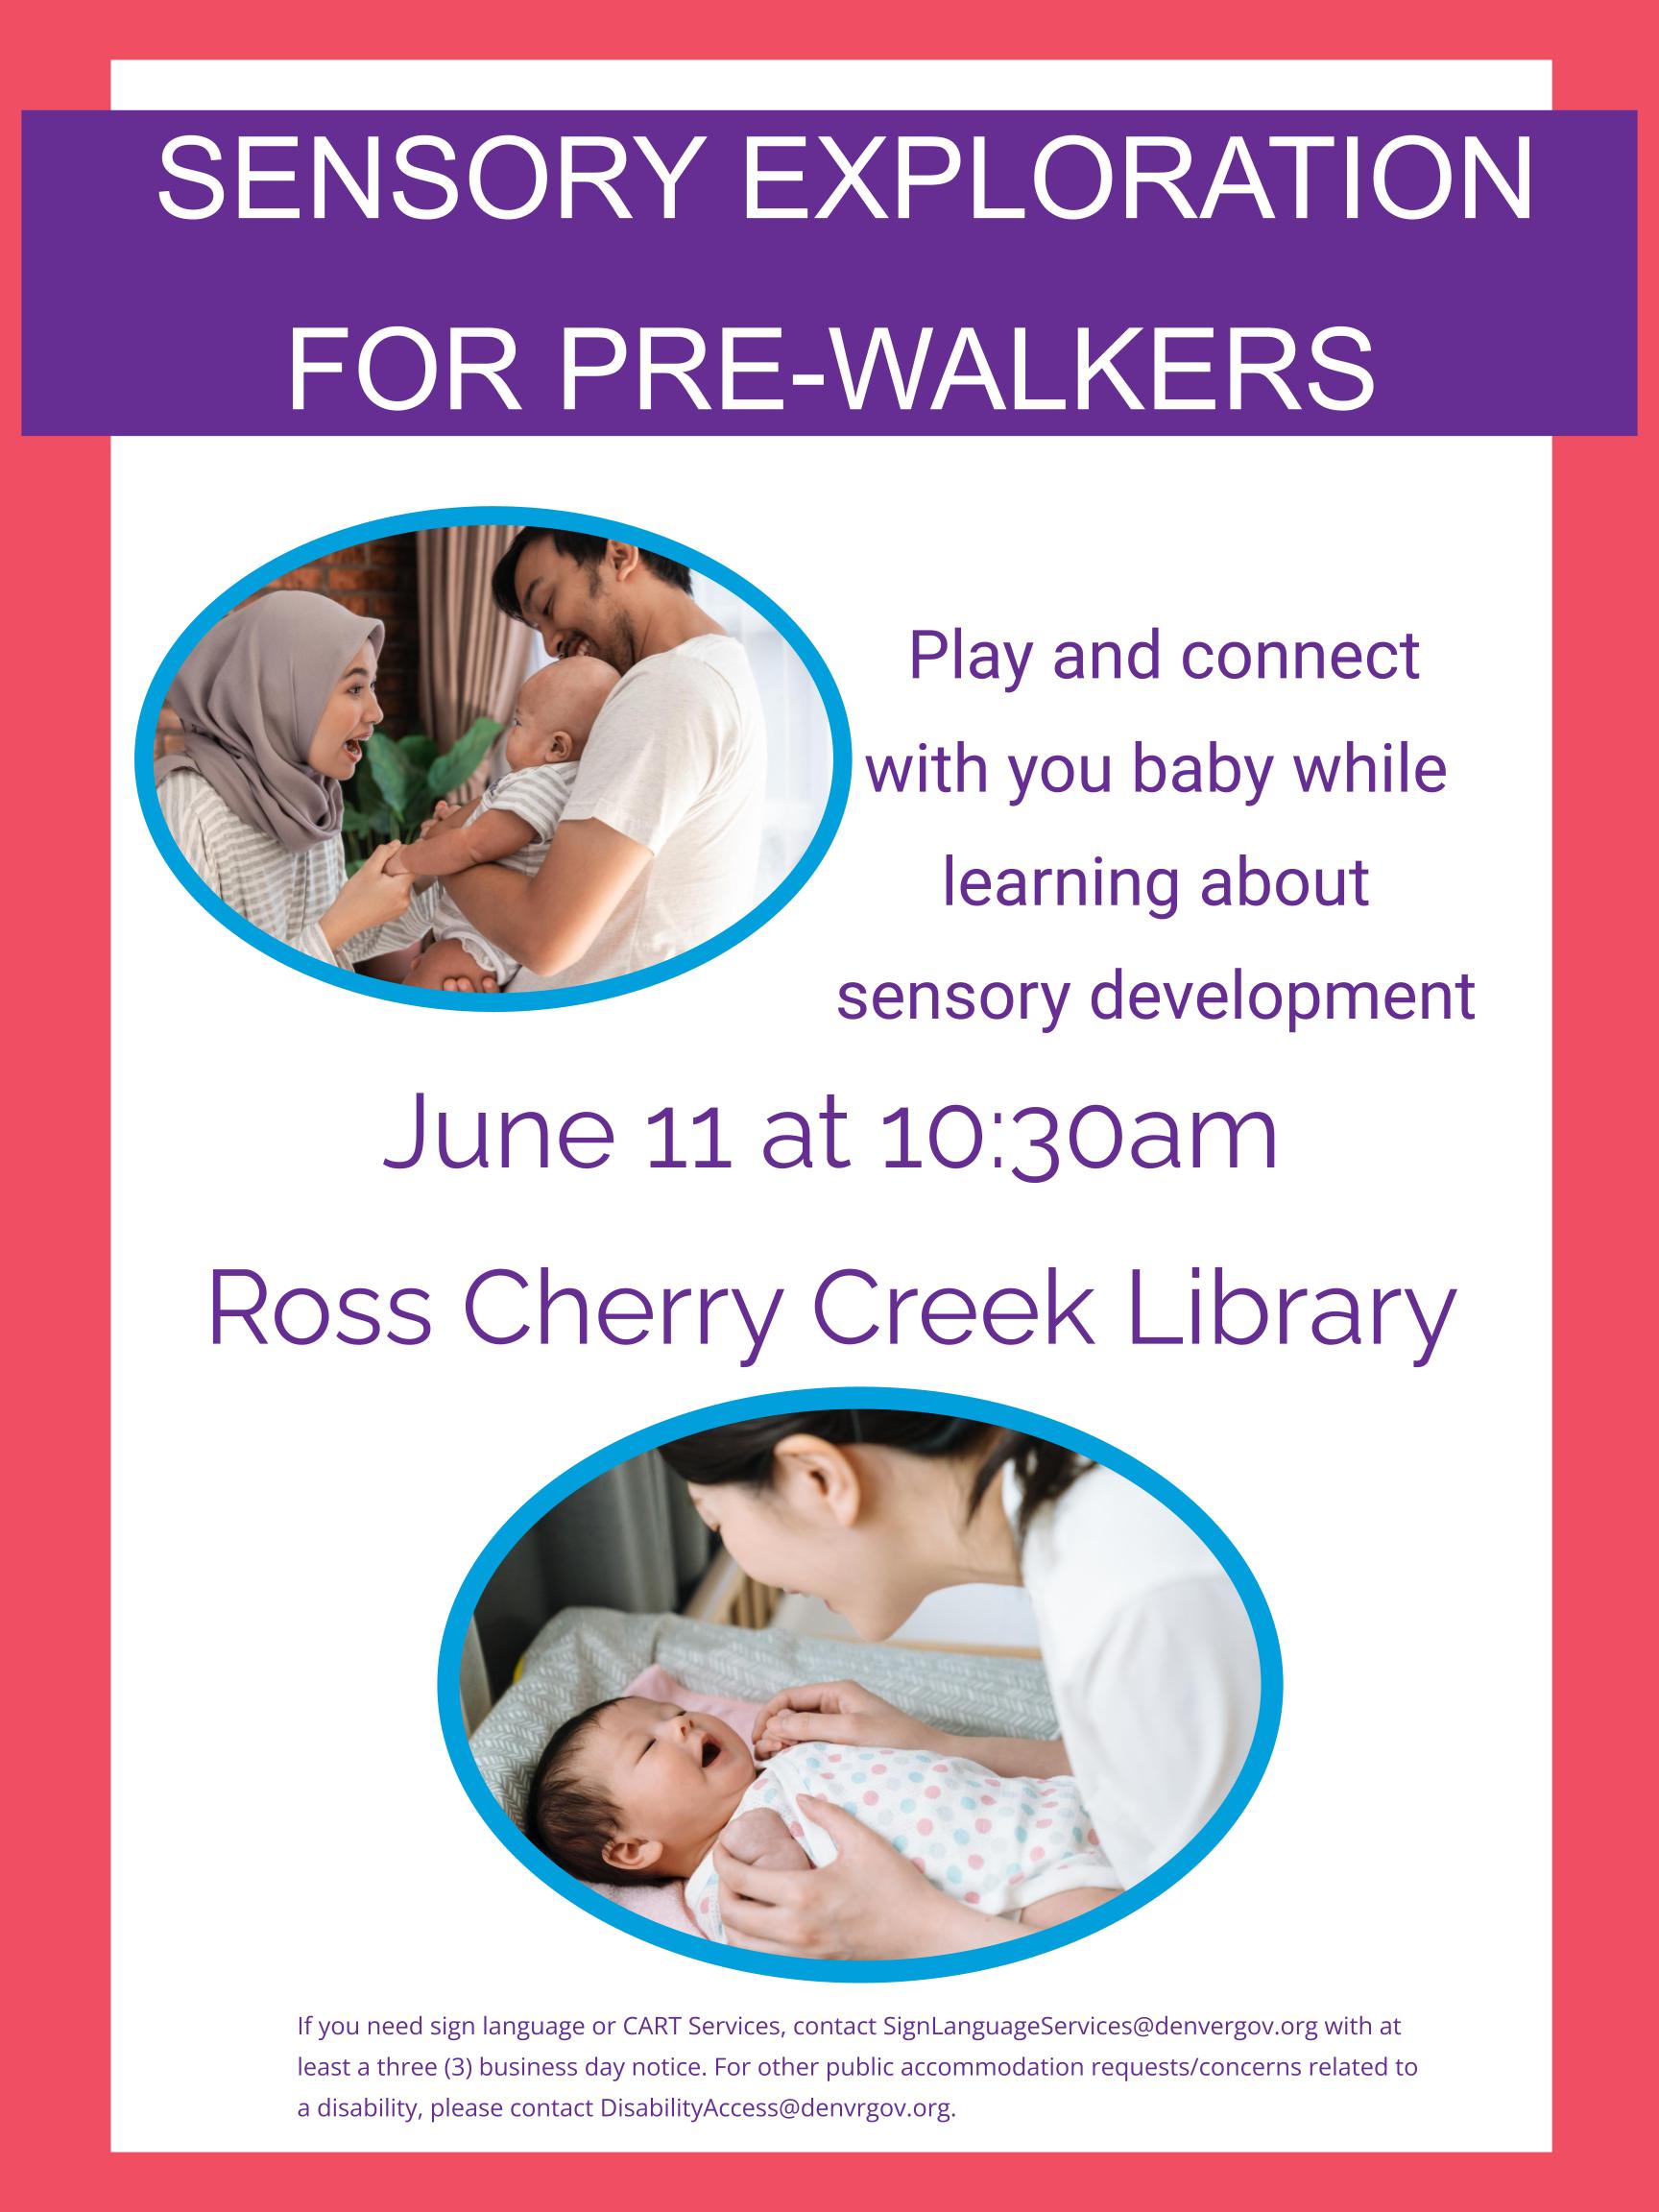 Poster depicting caregivers and babies with the information that Sensory Exploration for pre walkers involves  Play and connect with you baby while learning about sensory development and will take place on June 11 at 10:30am